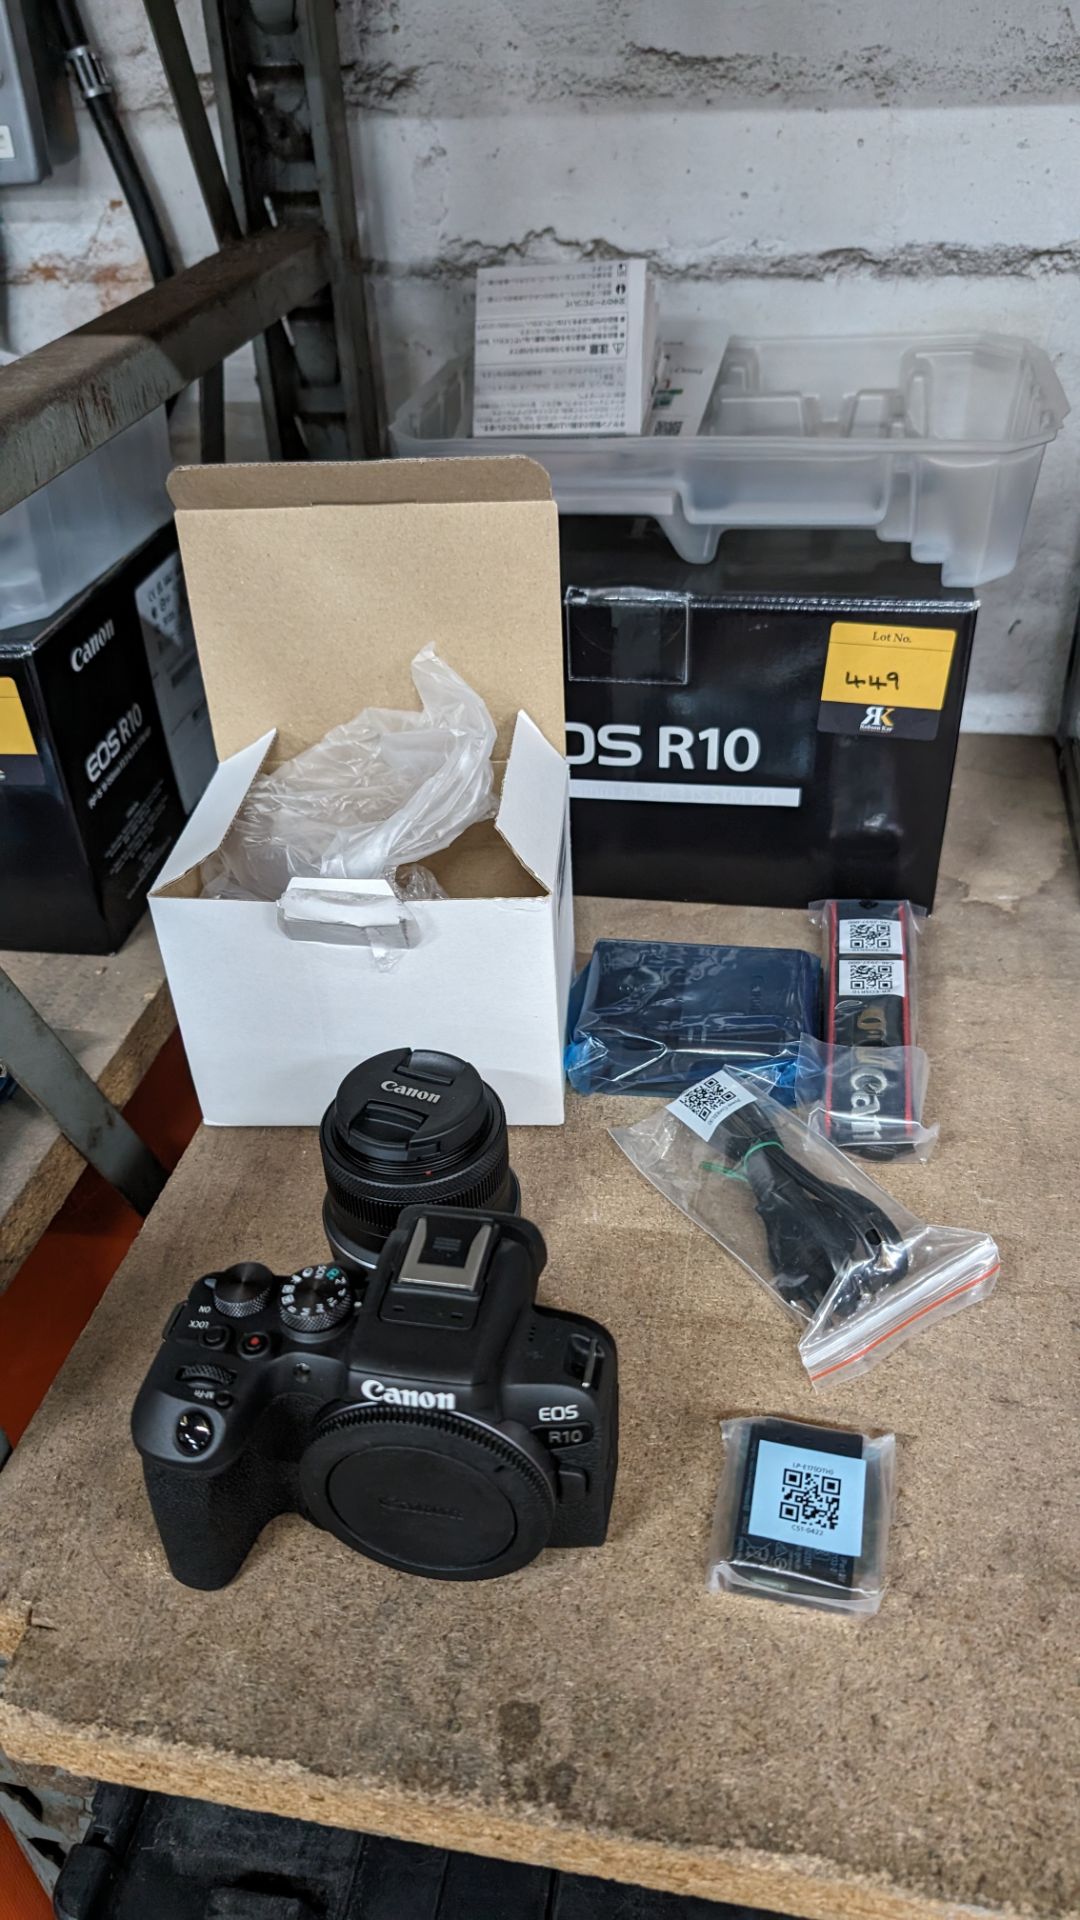 Canon EOS R10 camera kit, including 18-45mm lens, plus strap, battery, charger, cable and more - Image 2 of 14